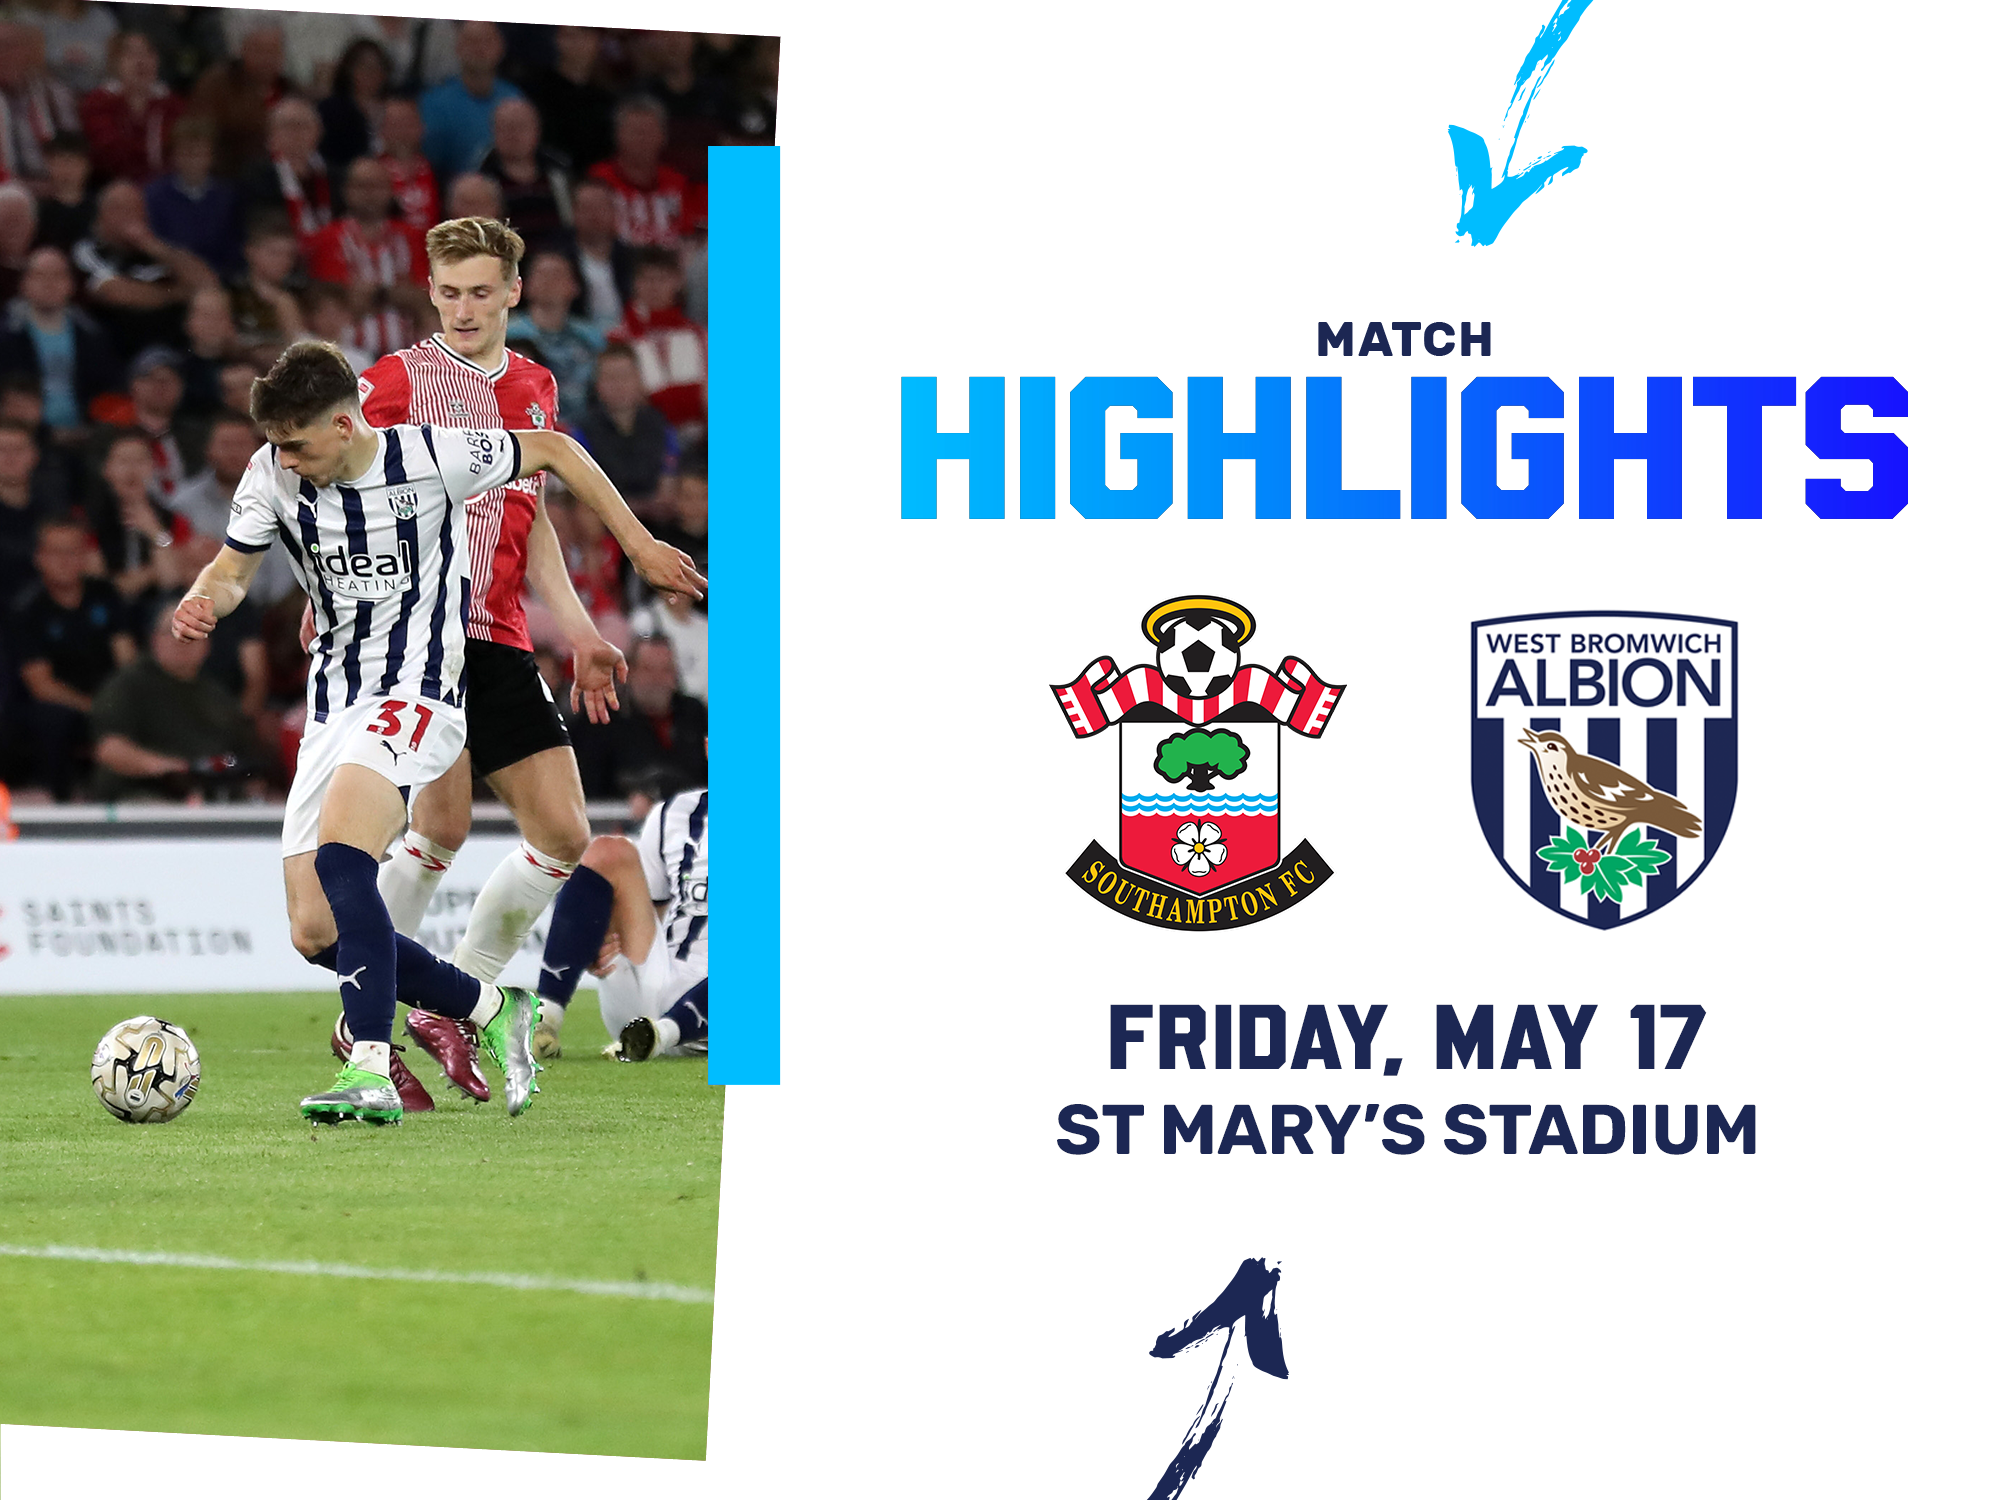 A photo highlights graphic, showing the club crests of Southampton and Albion, along with an action shot of Tom Fellows in the 23/24 home kit at St Mary's